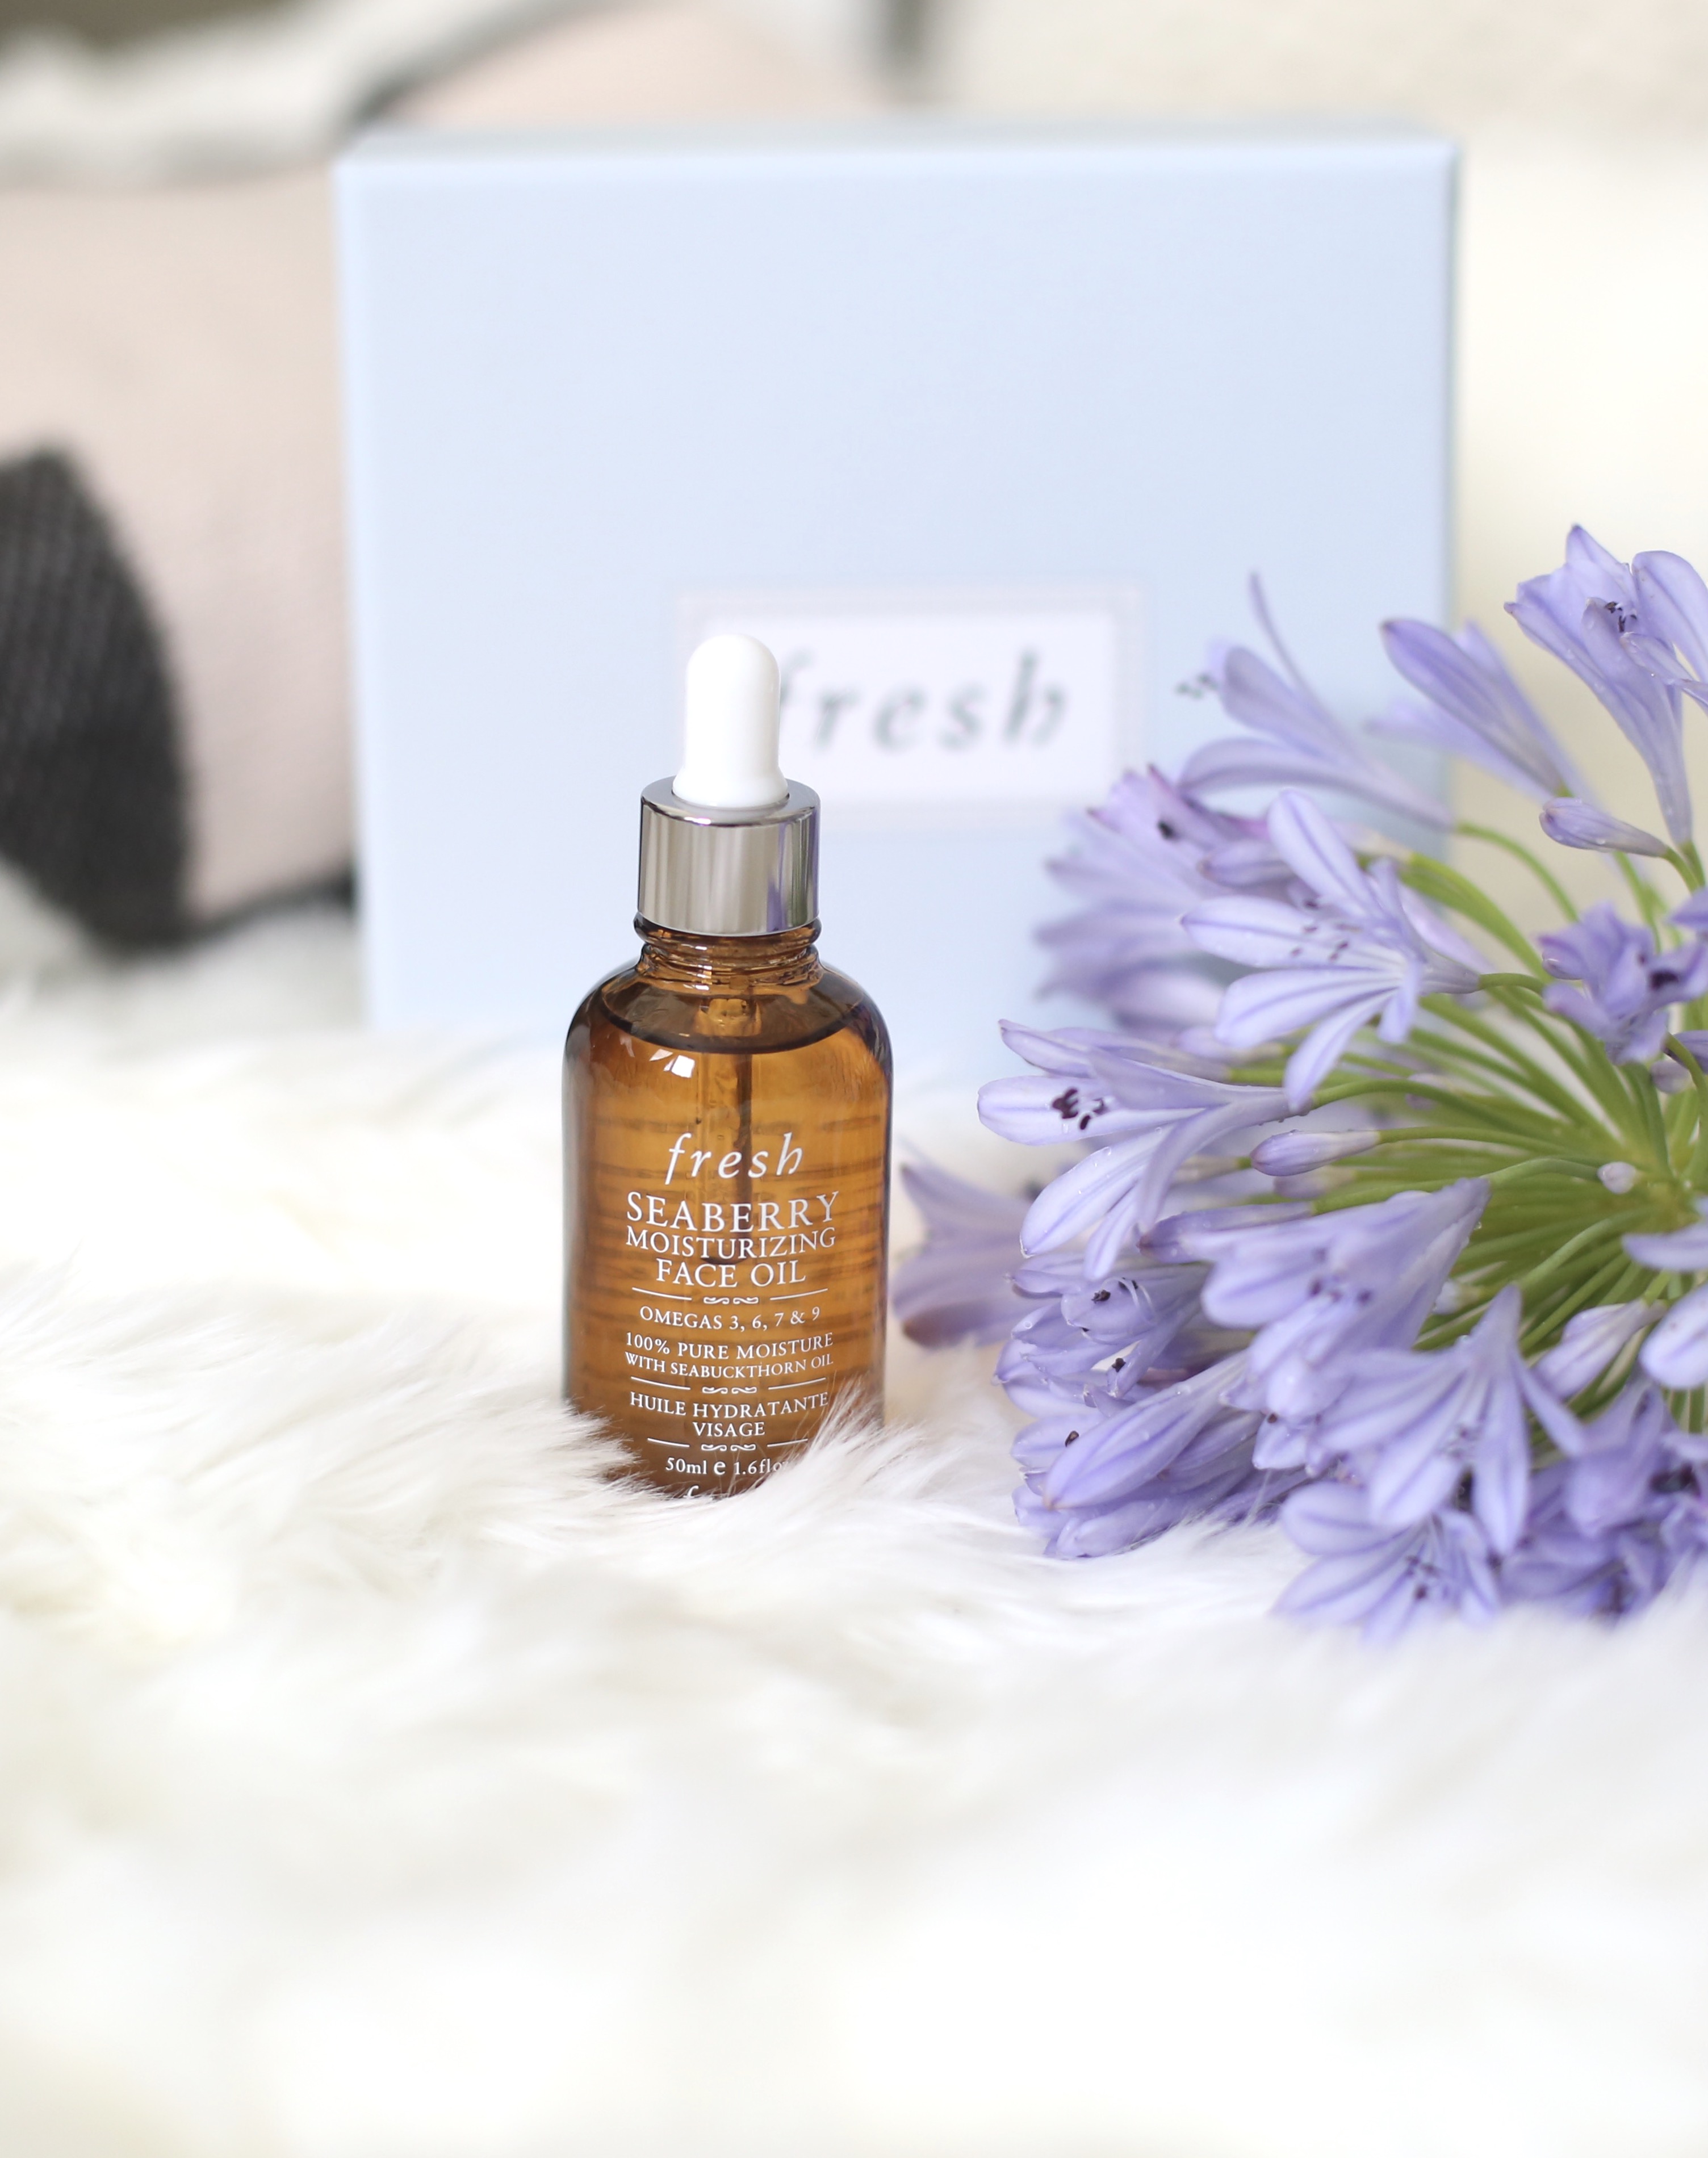 Fresh Seaberry Moisturizing Face Oil Review